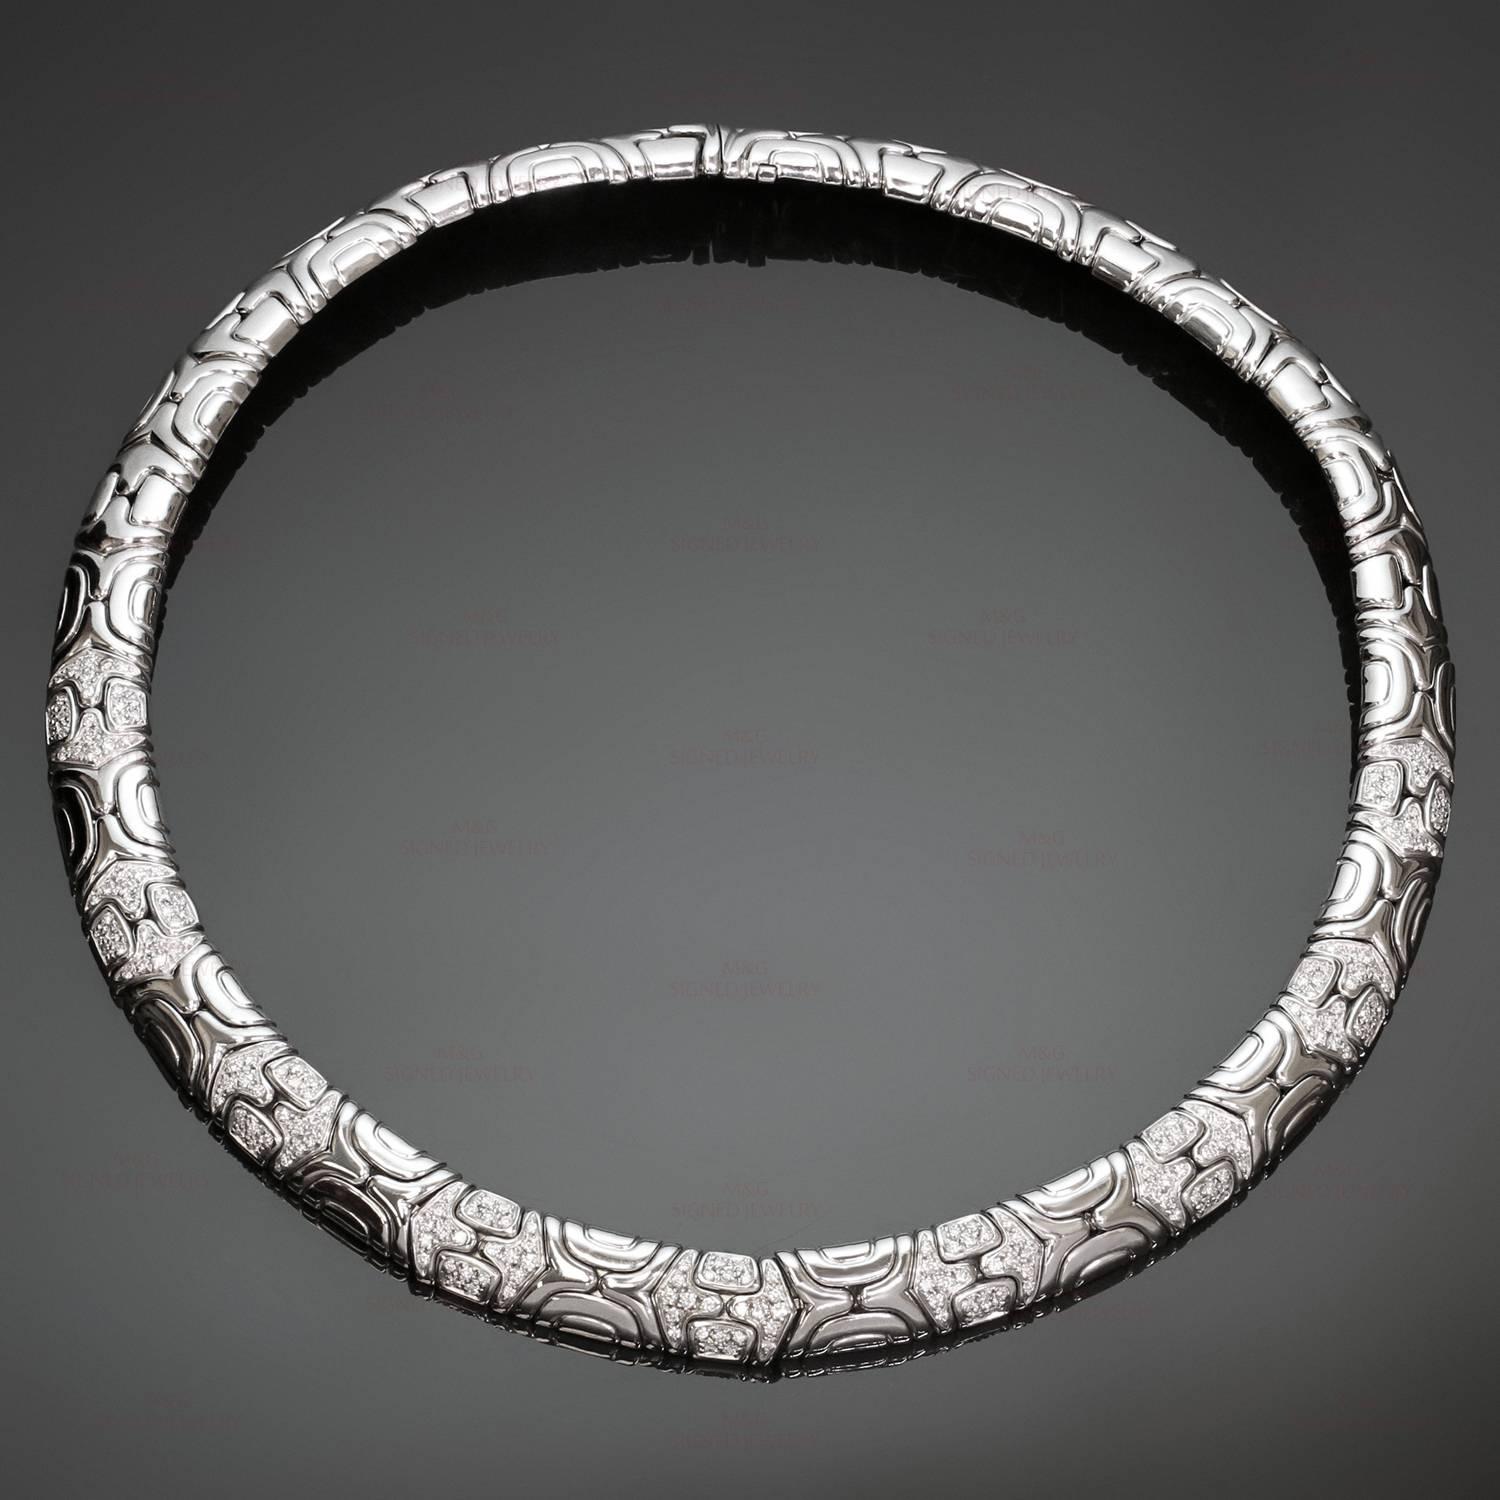 This stunning Bulgari necklace from the iconic Parenthesis collection features geometric links crafted in 18k white gold and beautifully pave-set with 216 round brilliant-cut diamonds of an estimated 4.30 carats. This is the small model of the